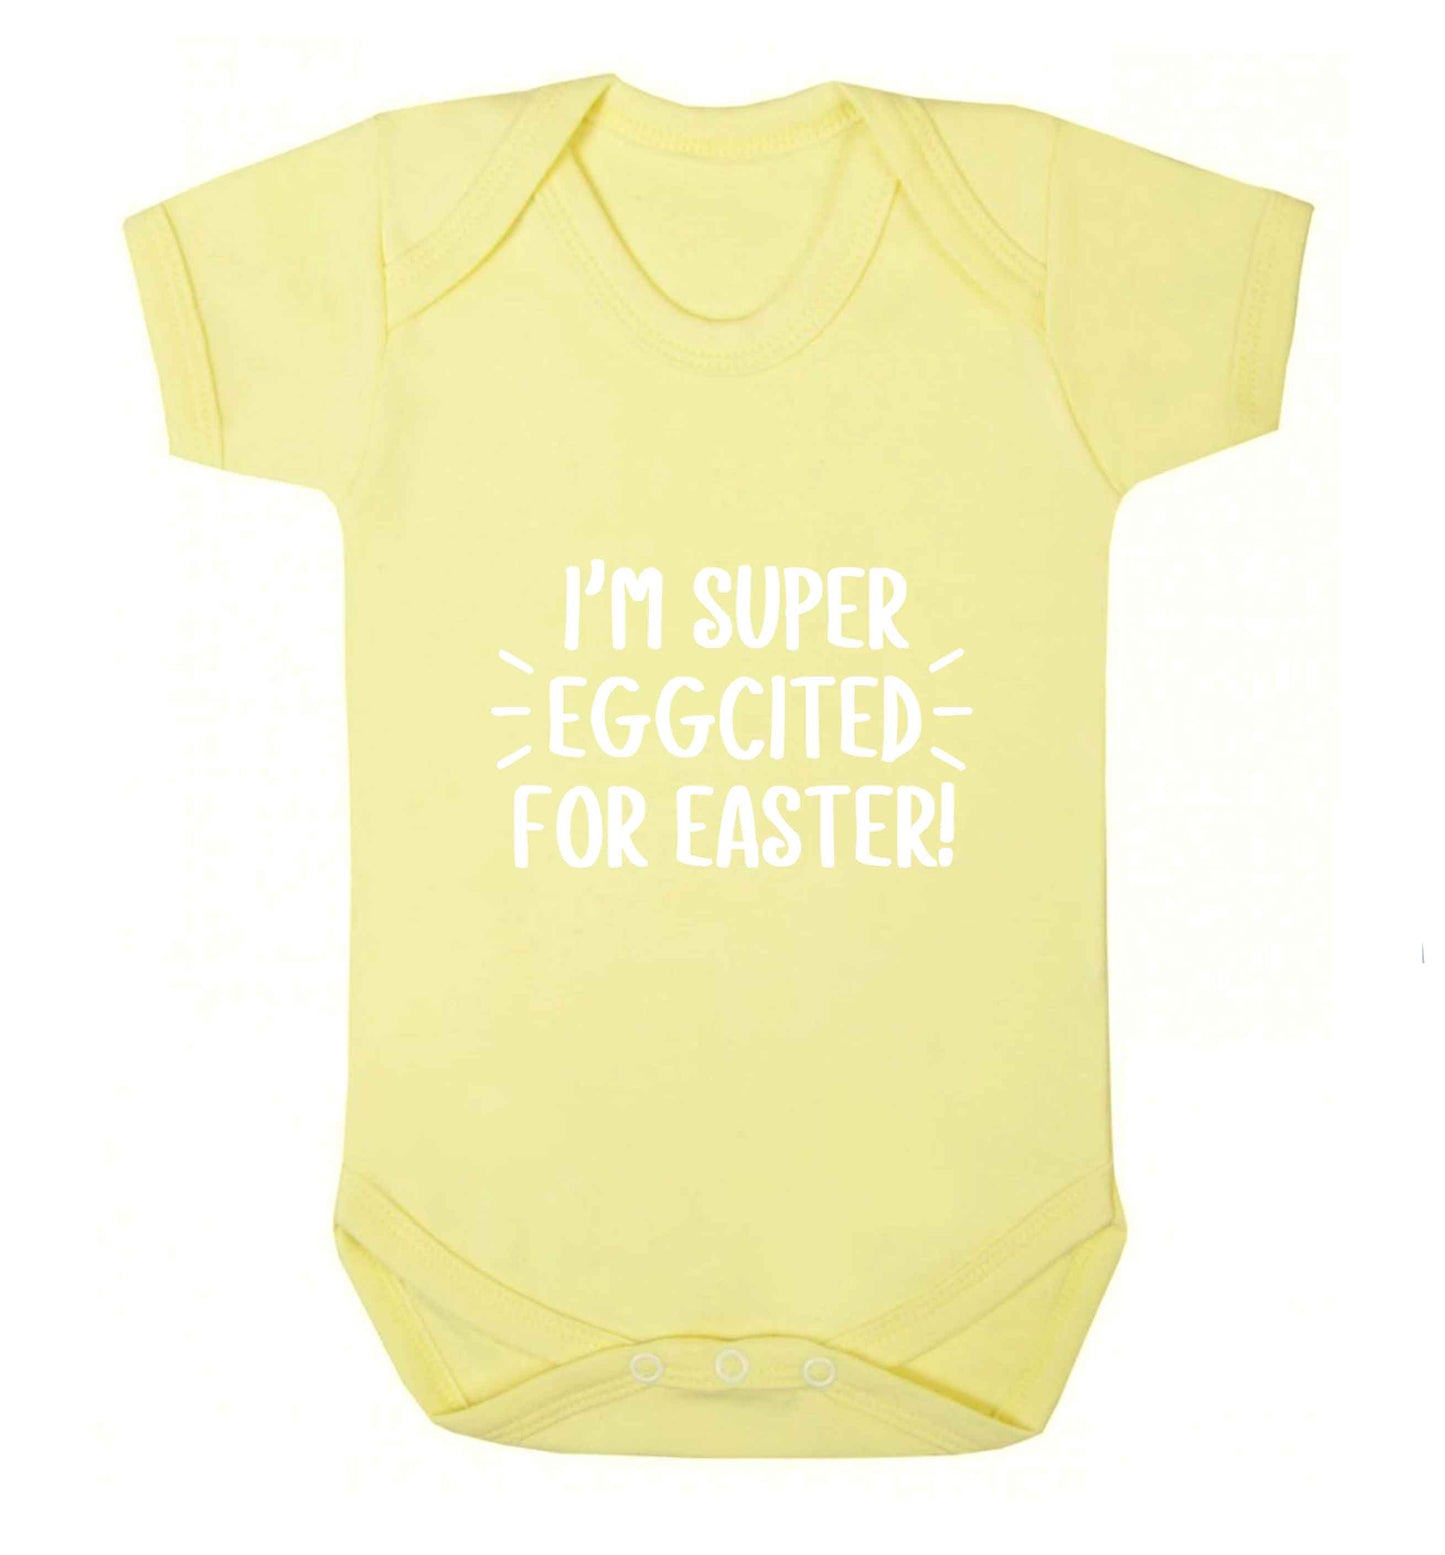 I'm super eggcited for Easter baby vest pale yellow 18-24 months